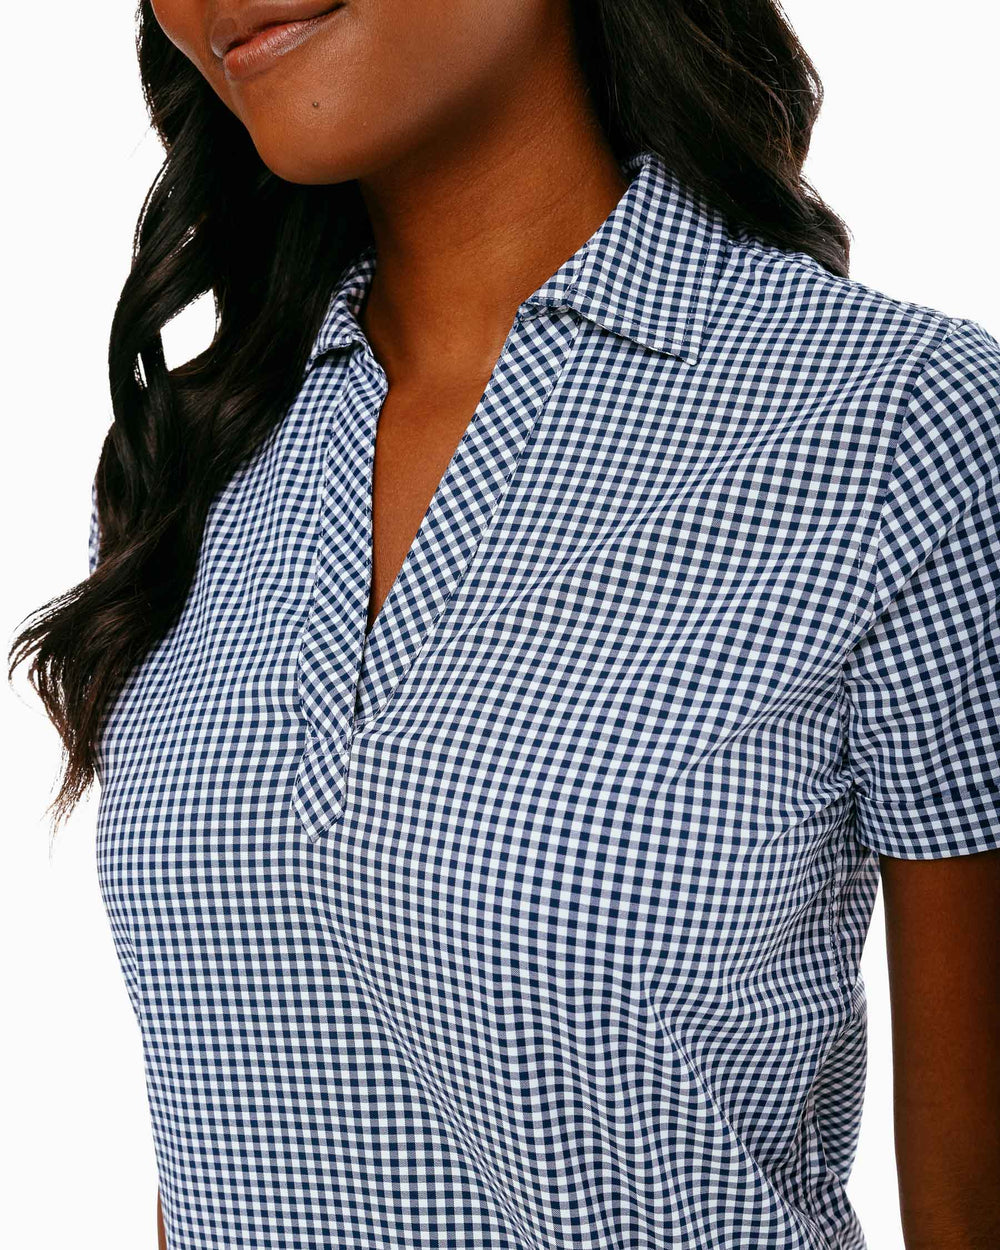 The detail of the Women's Gameday Kamryn Intercoastal Shirt Dress by Southern Tide - Navy